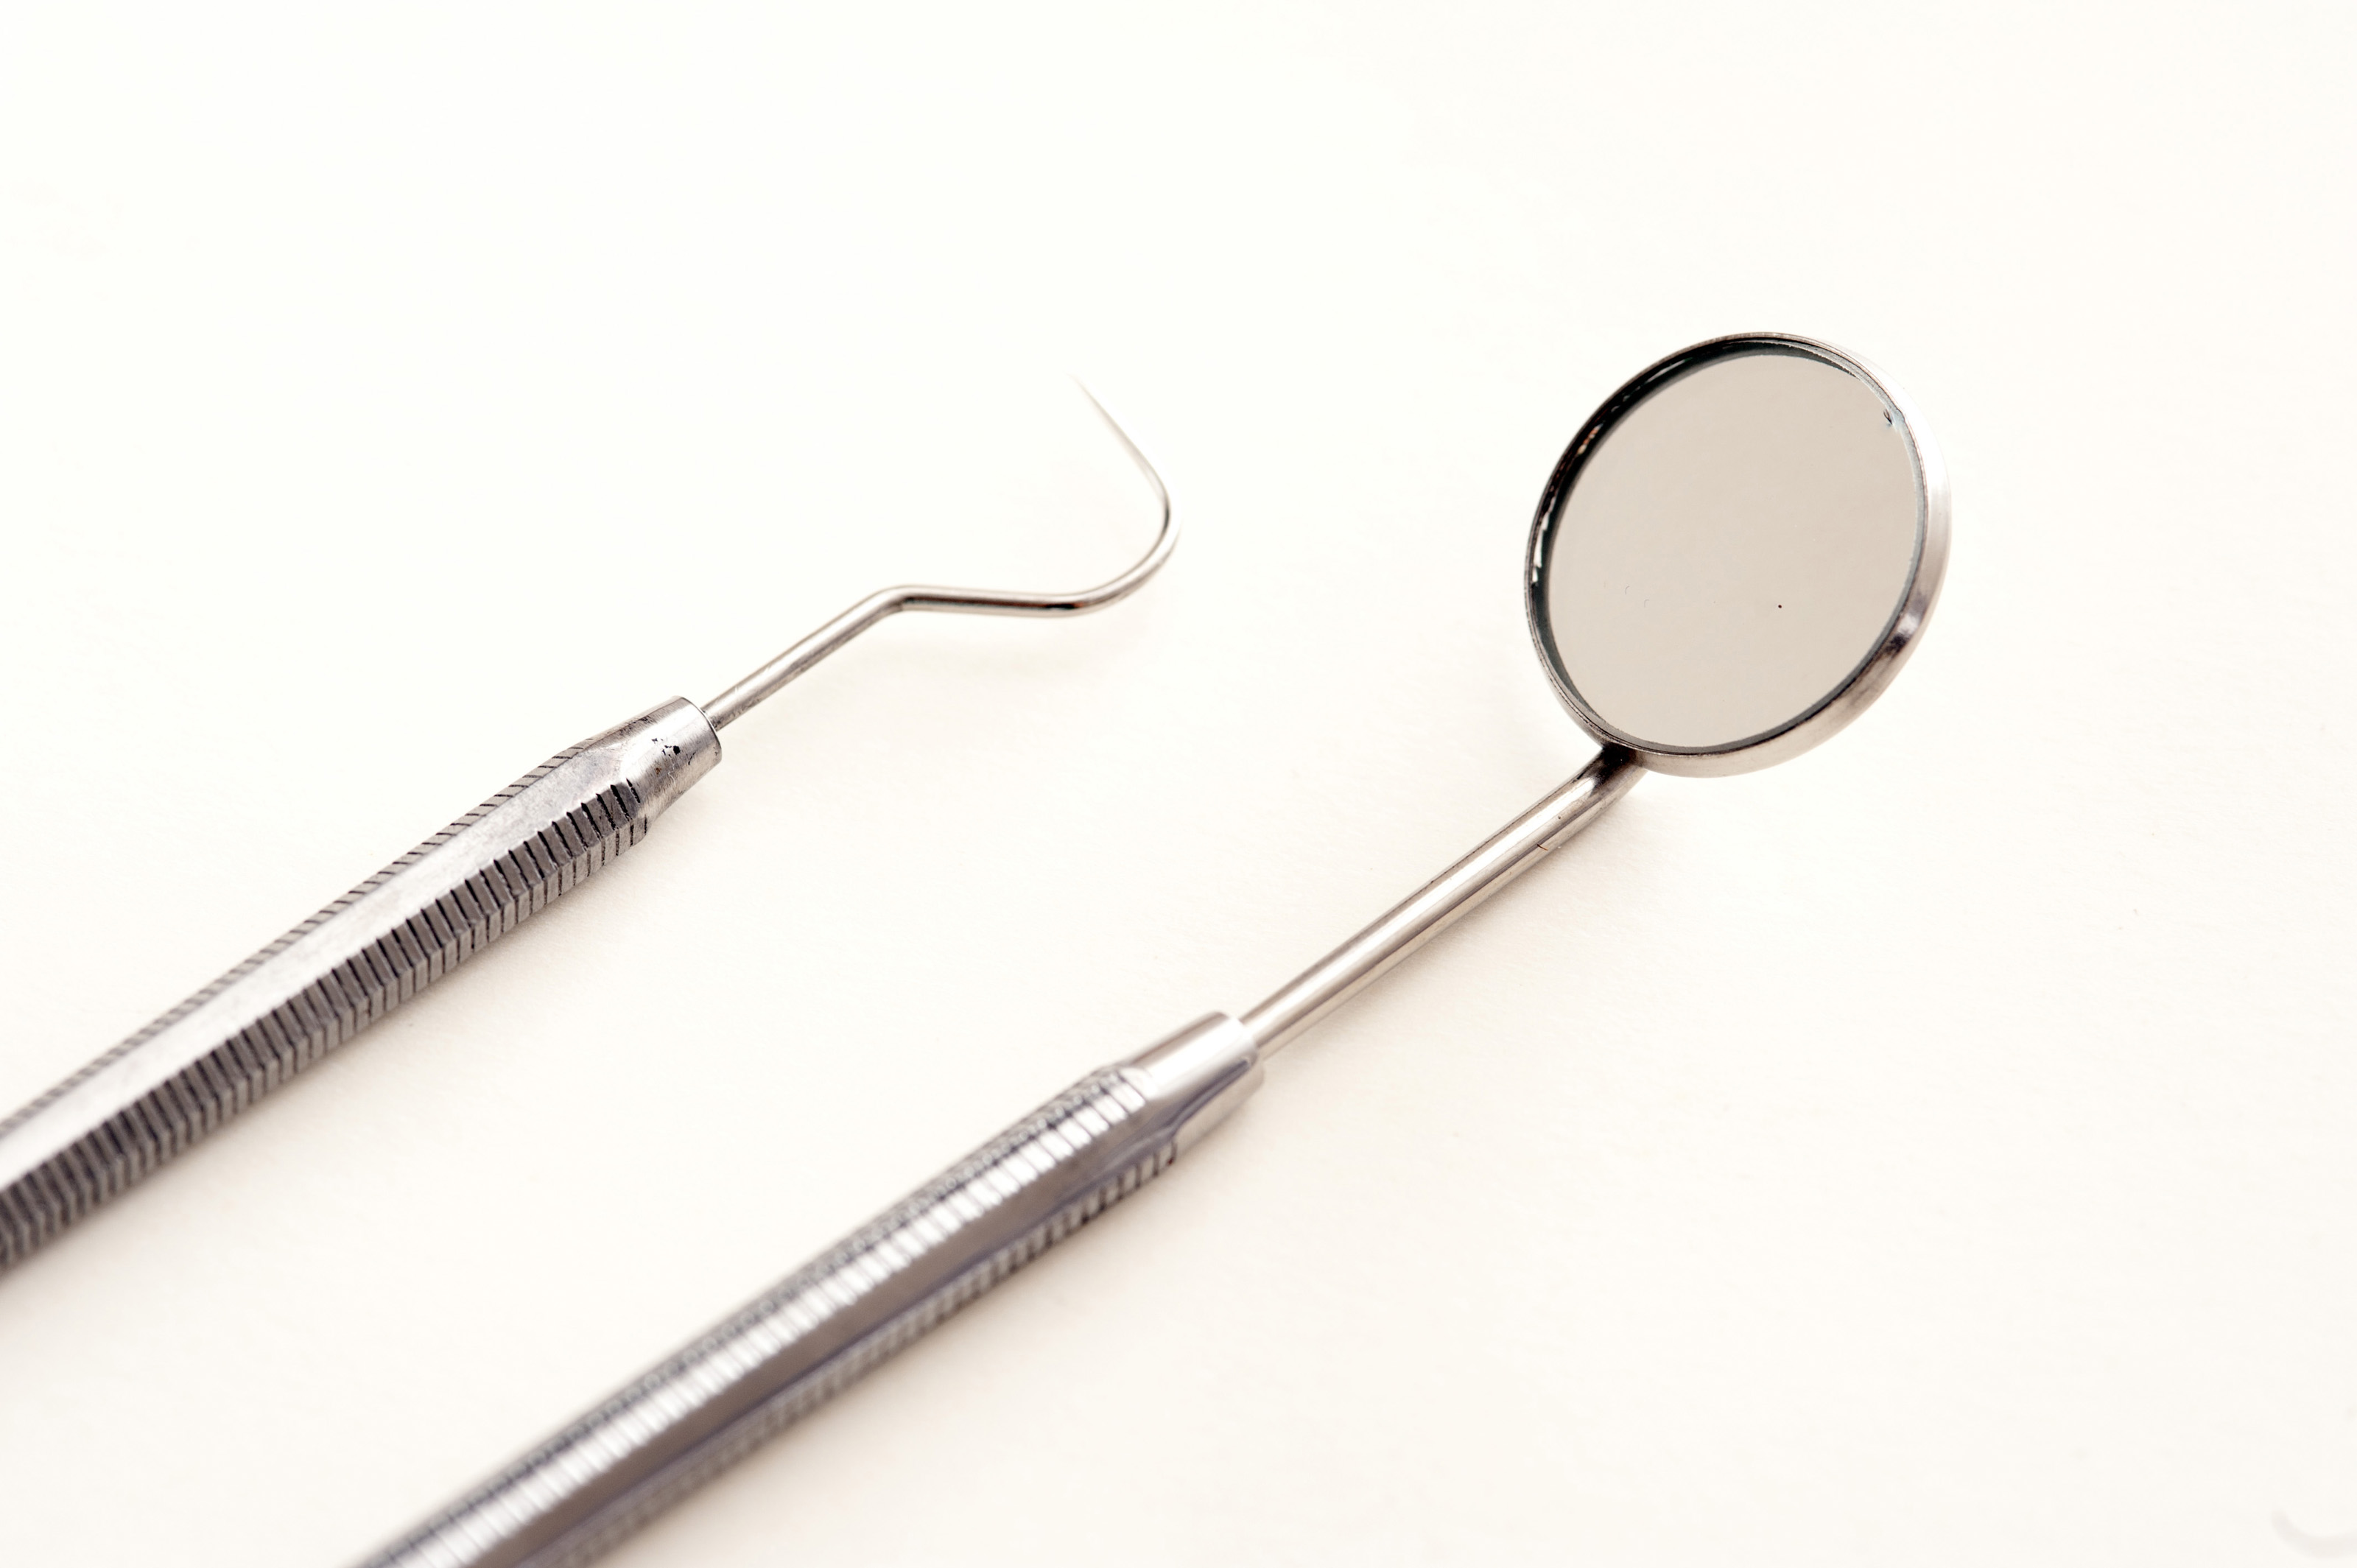 Free Stock Photo 11543 Dental Pick and Mirror on White Background | freeimageslive